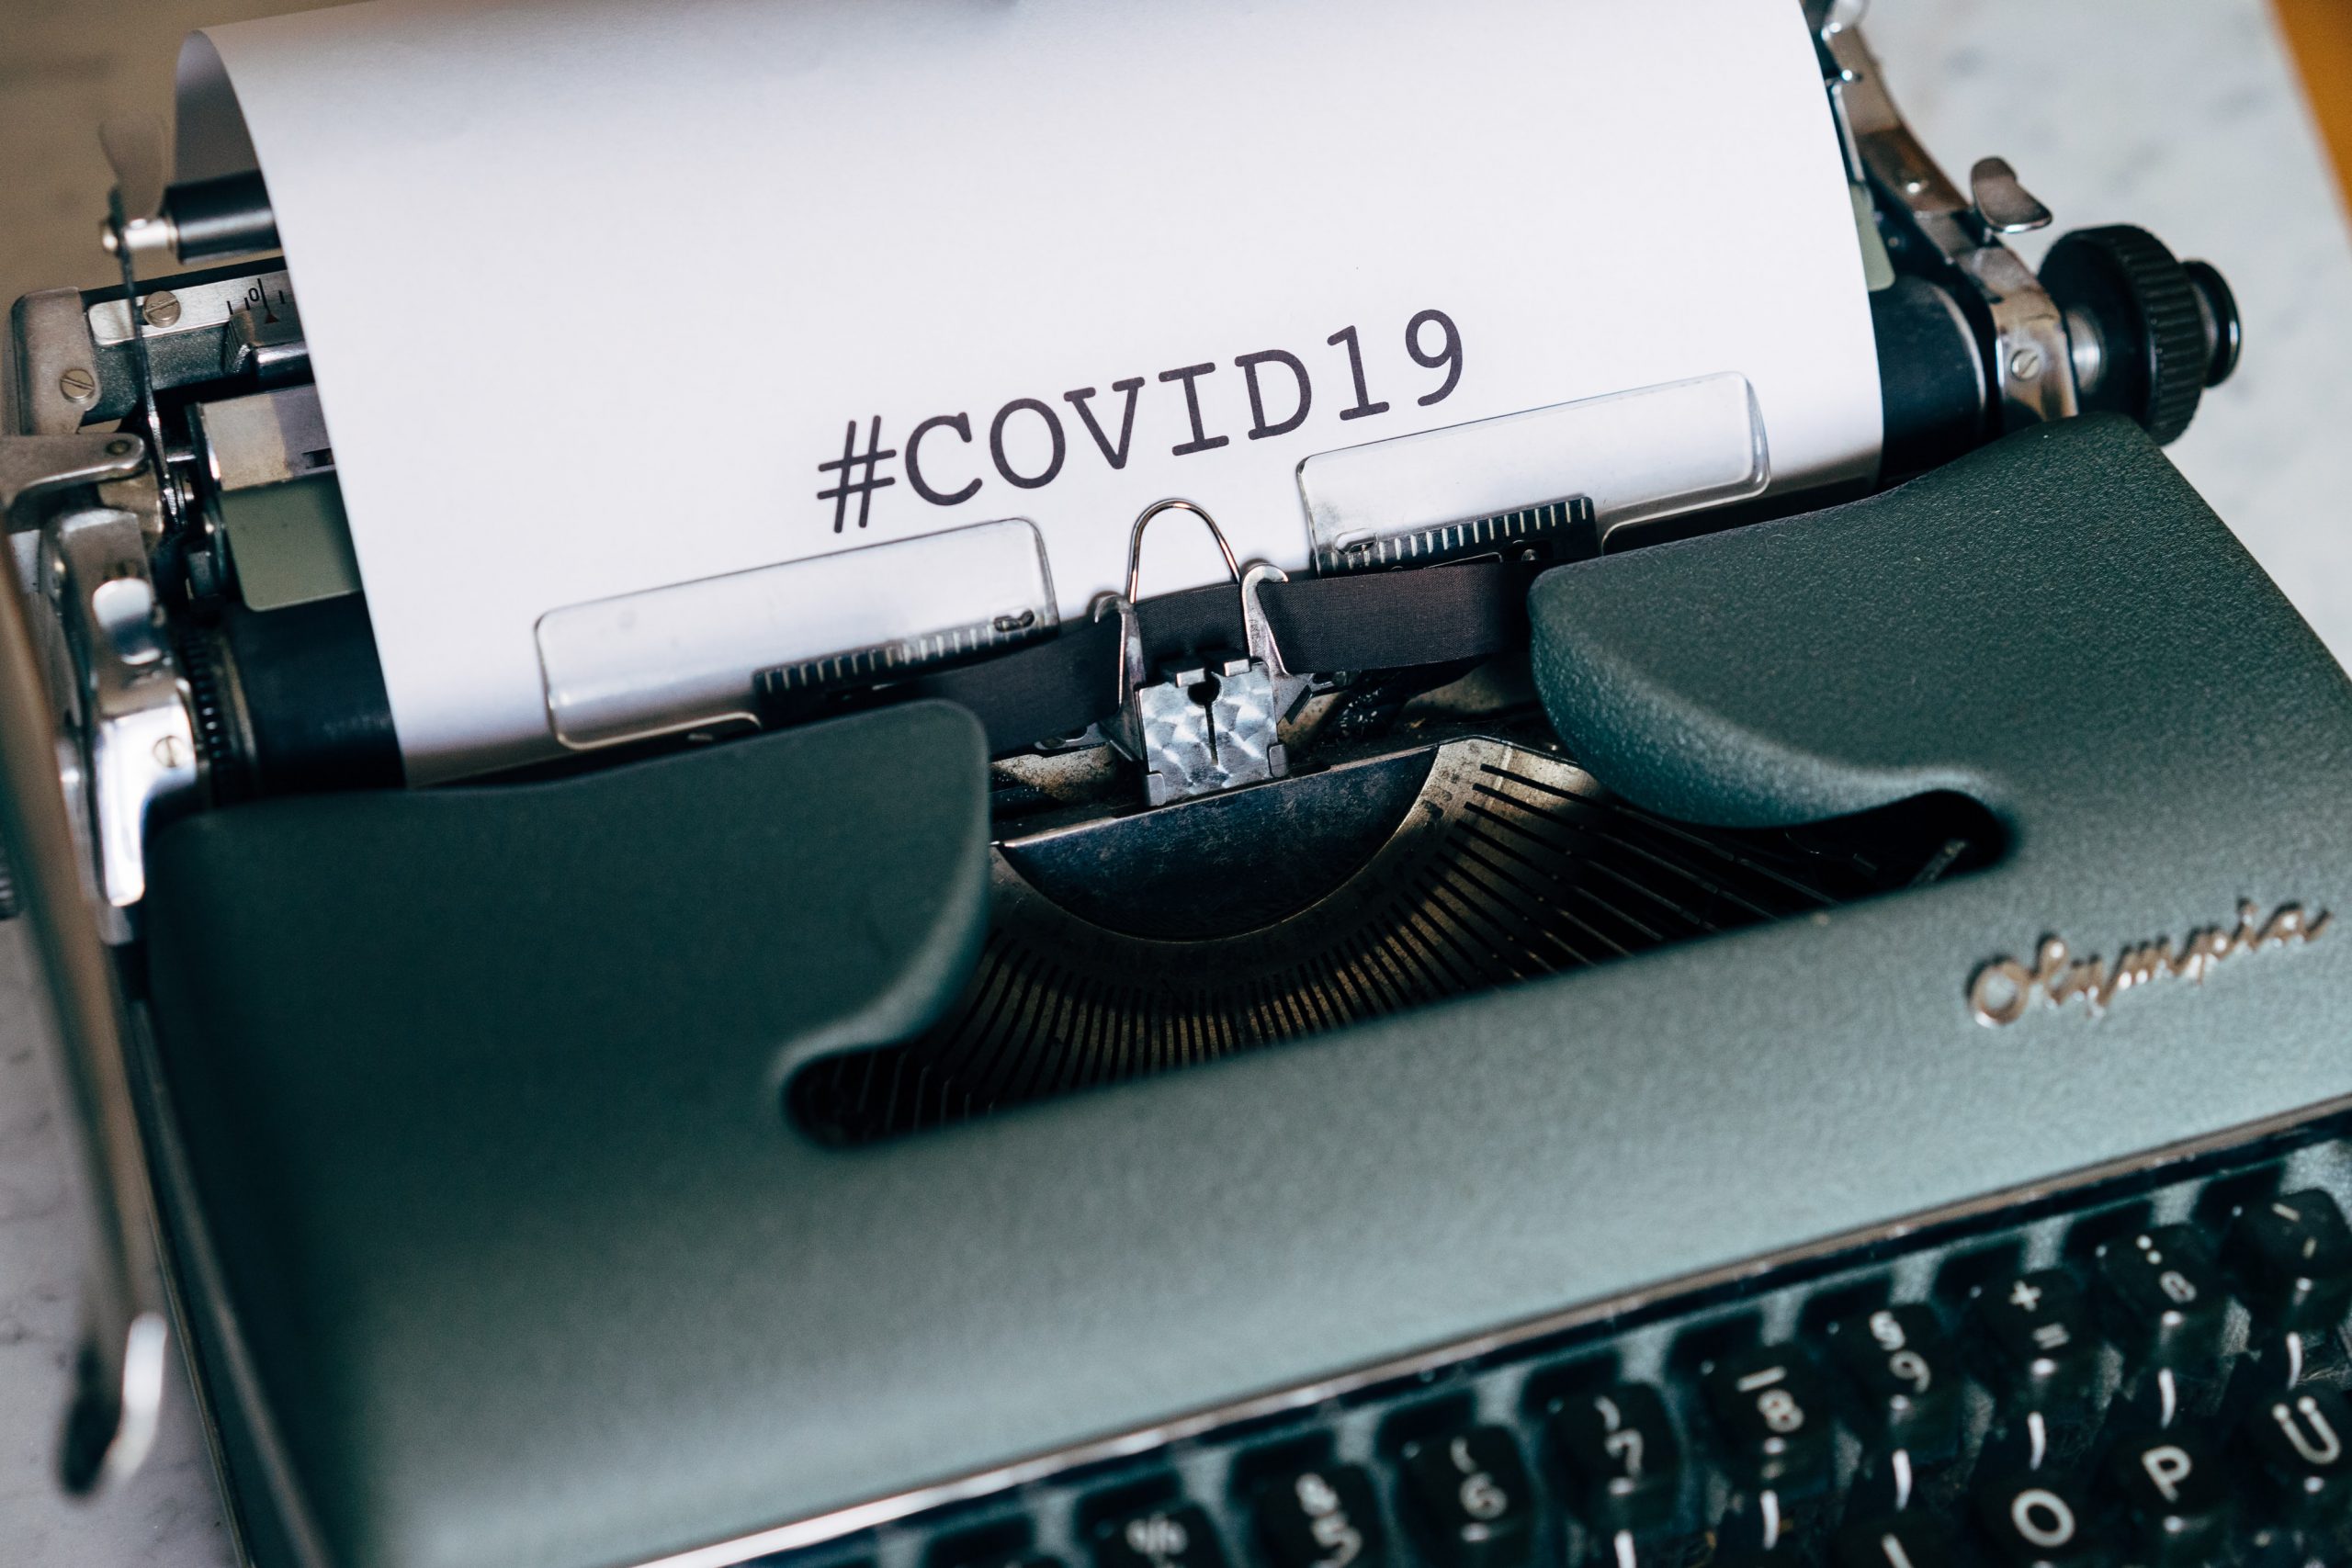 peer-reviewed articles on COVID-19